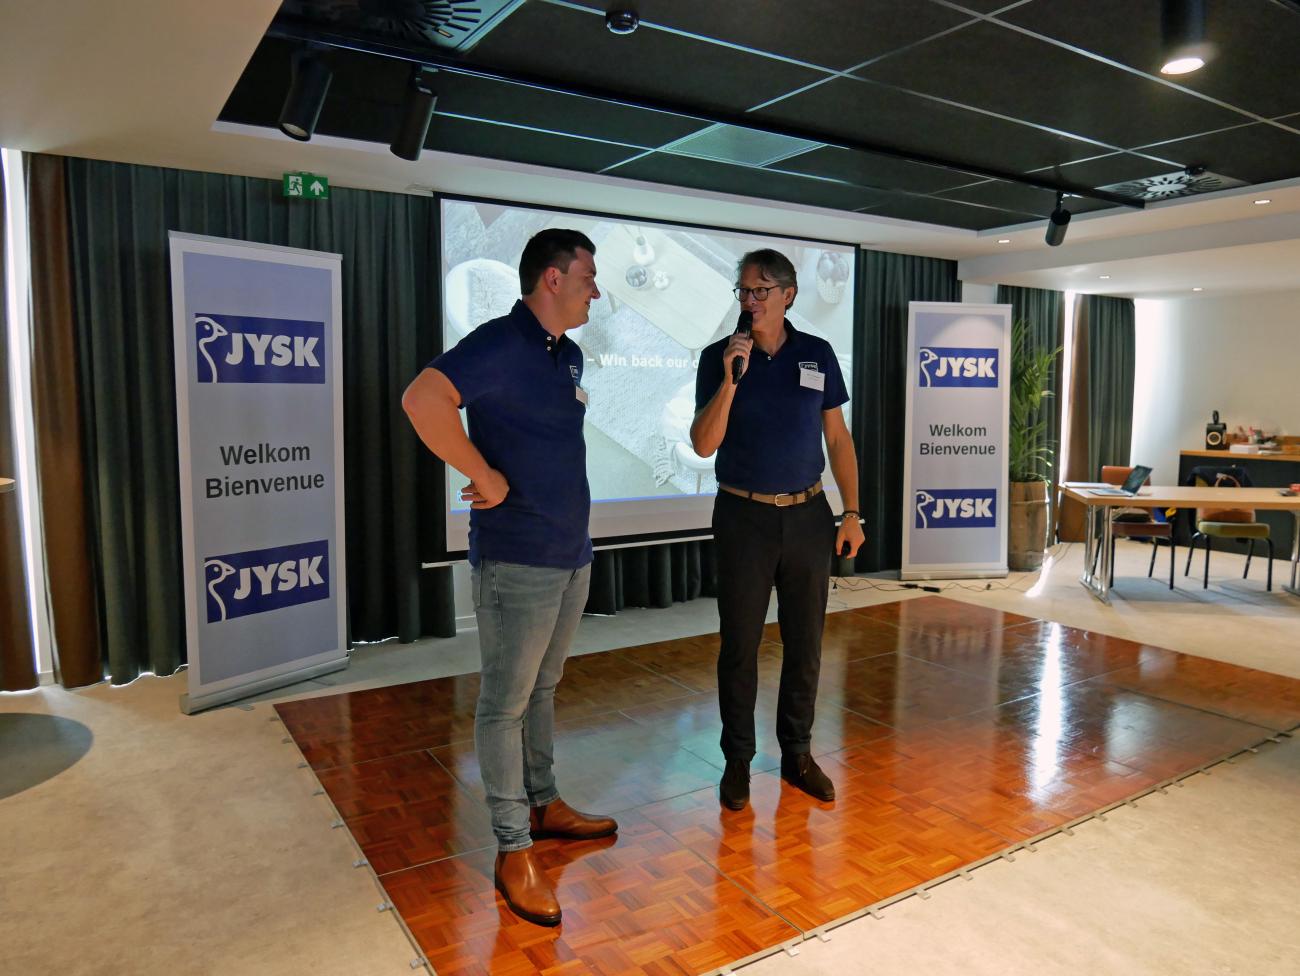 Head of Retail Marc ten Bokum and Store Manager Tom Vanhove